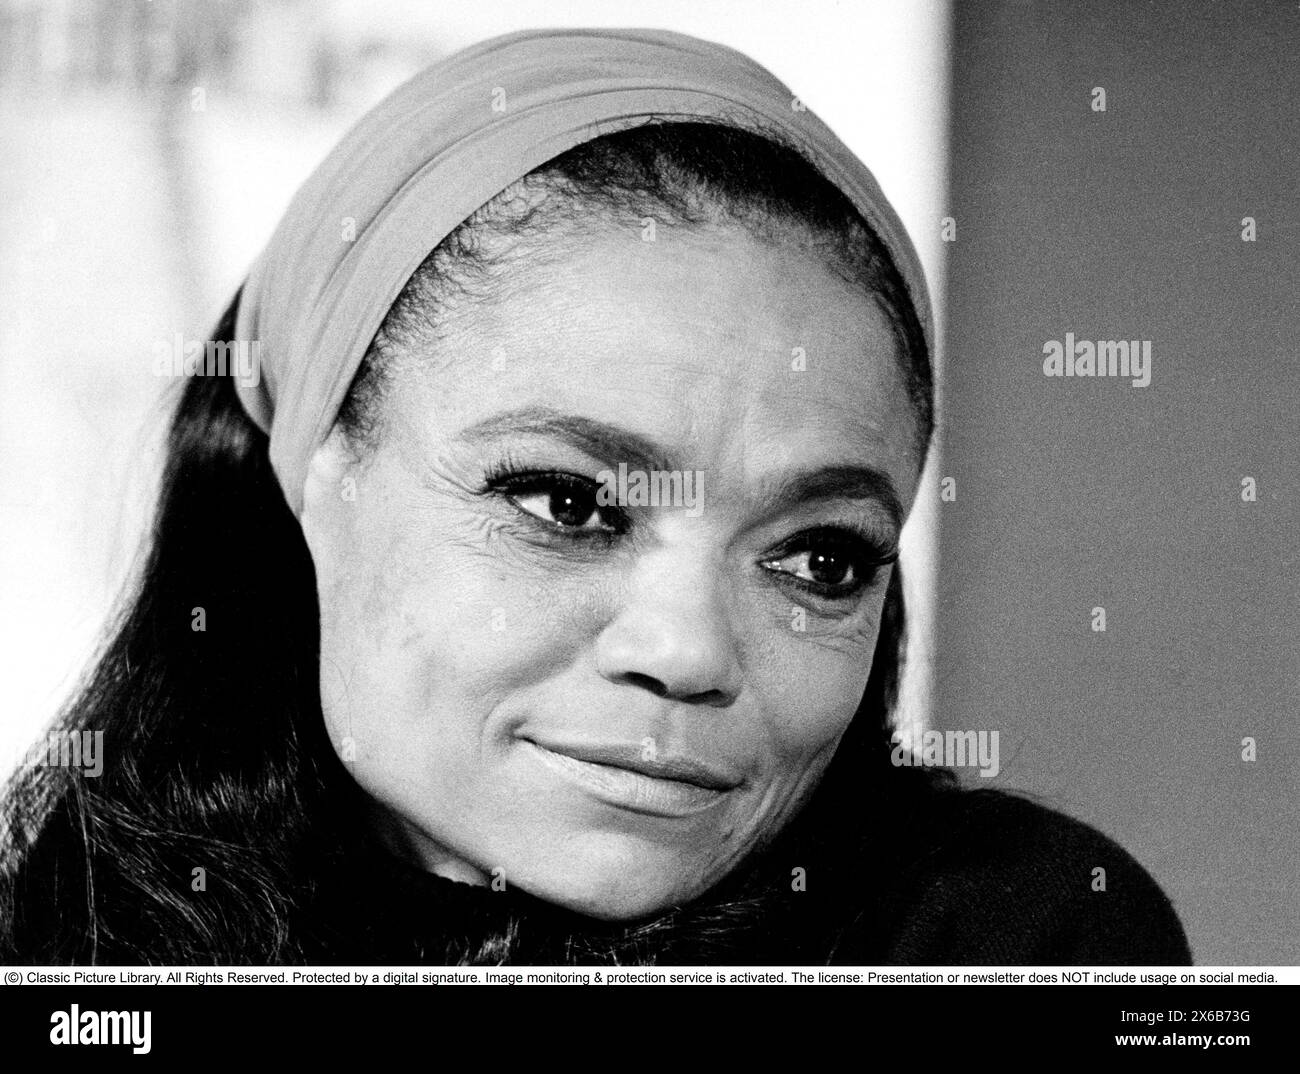 Eartha Mae Kitt (born Keith; January 17, 1927 – December 25, 2008) was an American singer and actress known for her highly distinctive singing style and her 1953 recordings of 'C'est si bon' and the Christmas novelty song 'Santa Baby'. Pictured when visiting Sweden January 25 1975. Stock Photo